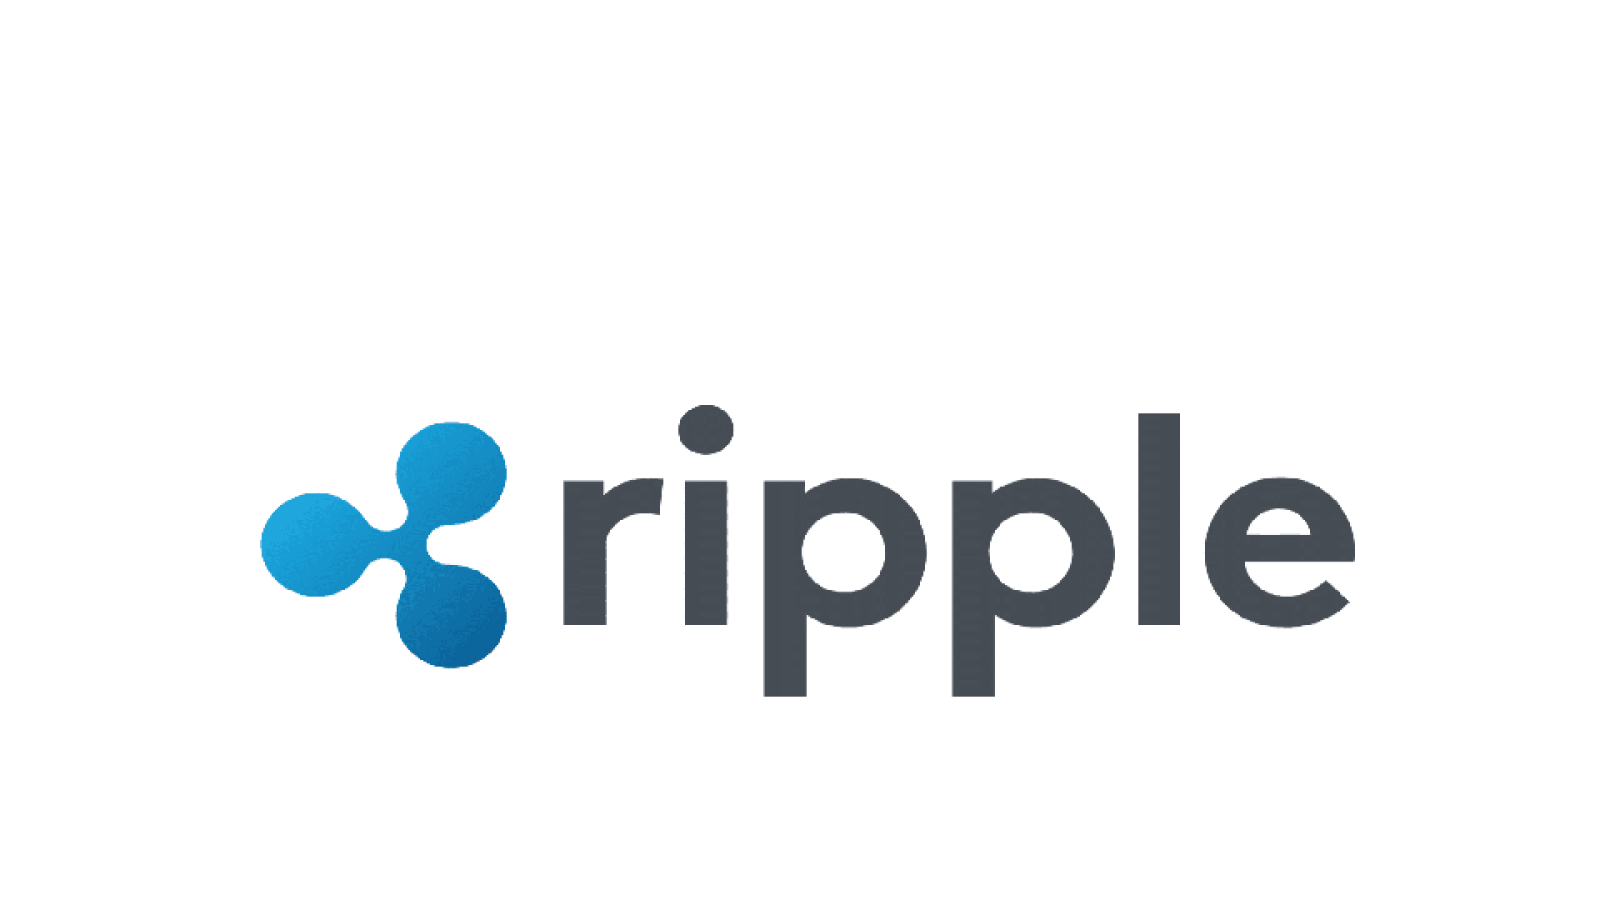 $129 mln worth of XRP sold in Q4 